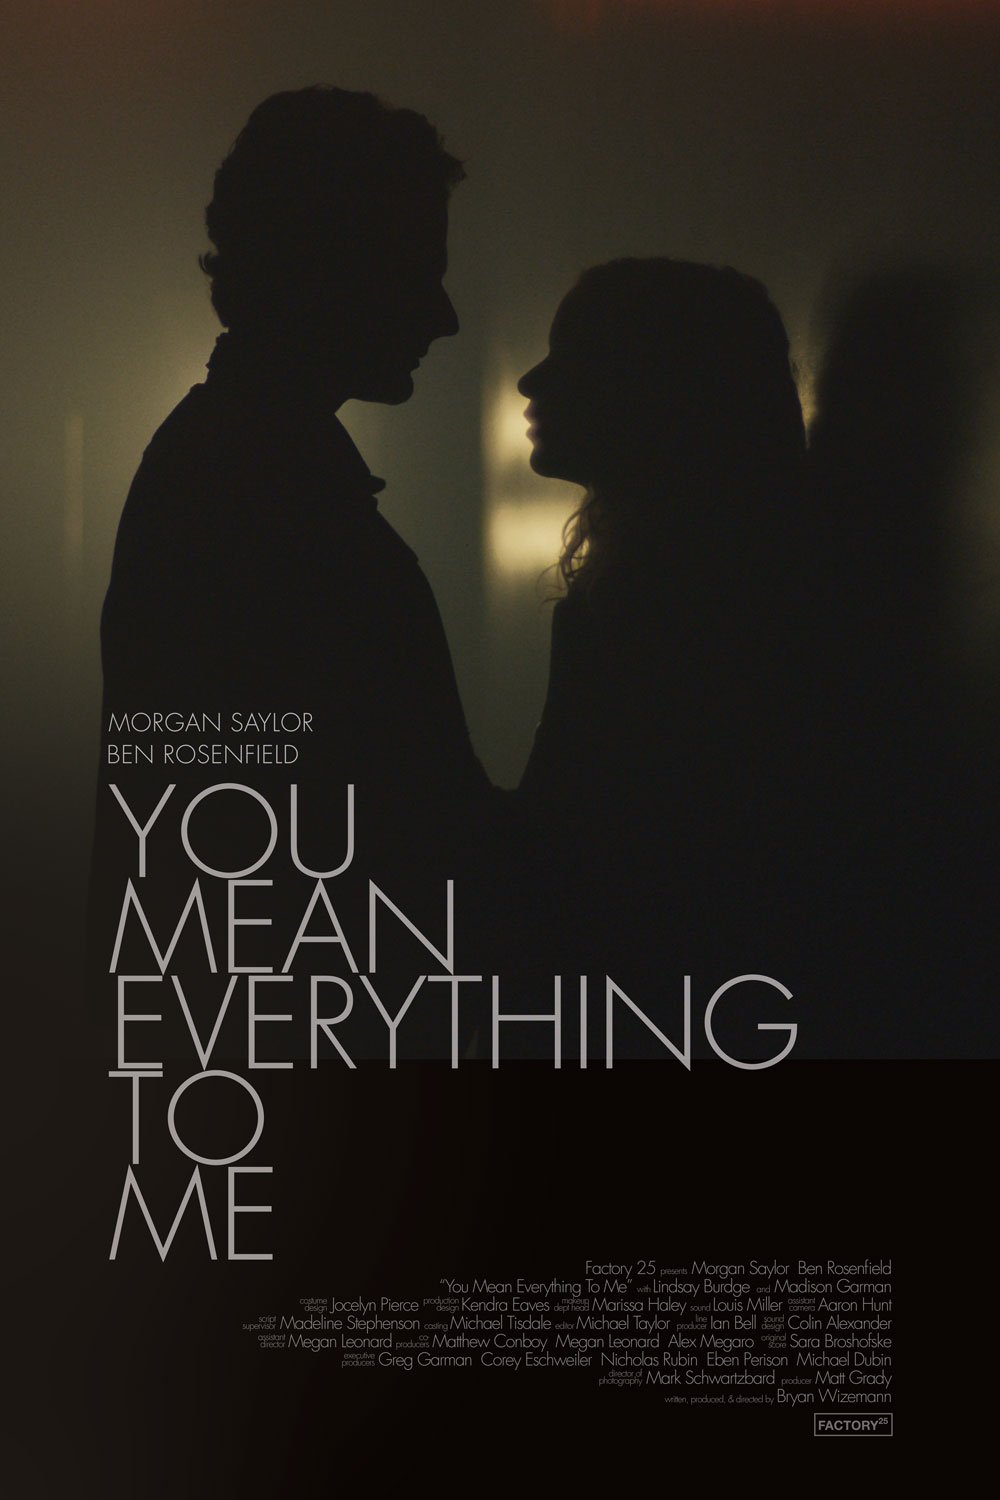 YOU MEAN EVERYTHING TO ME /// BRYAN WIZEMANN